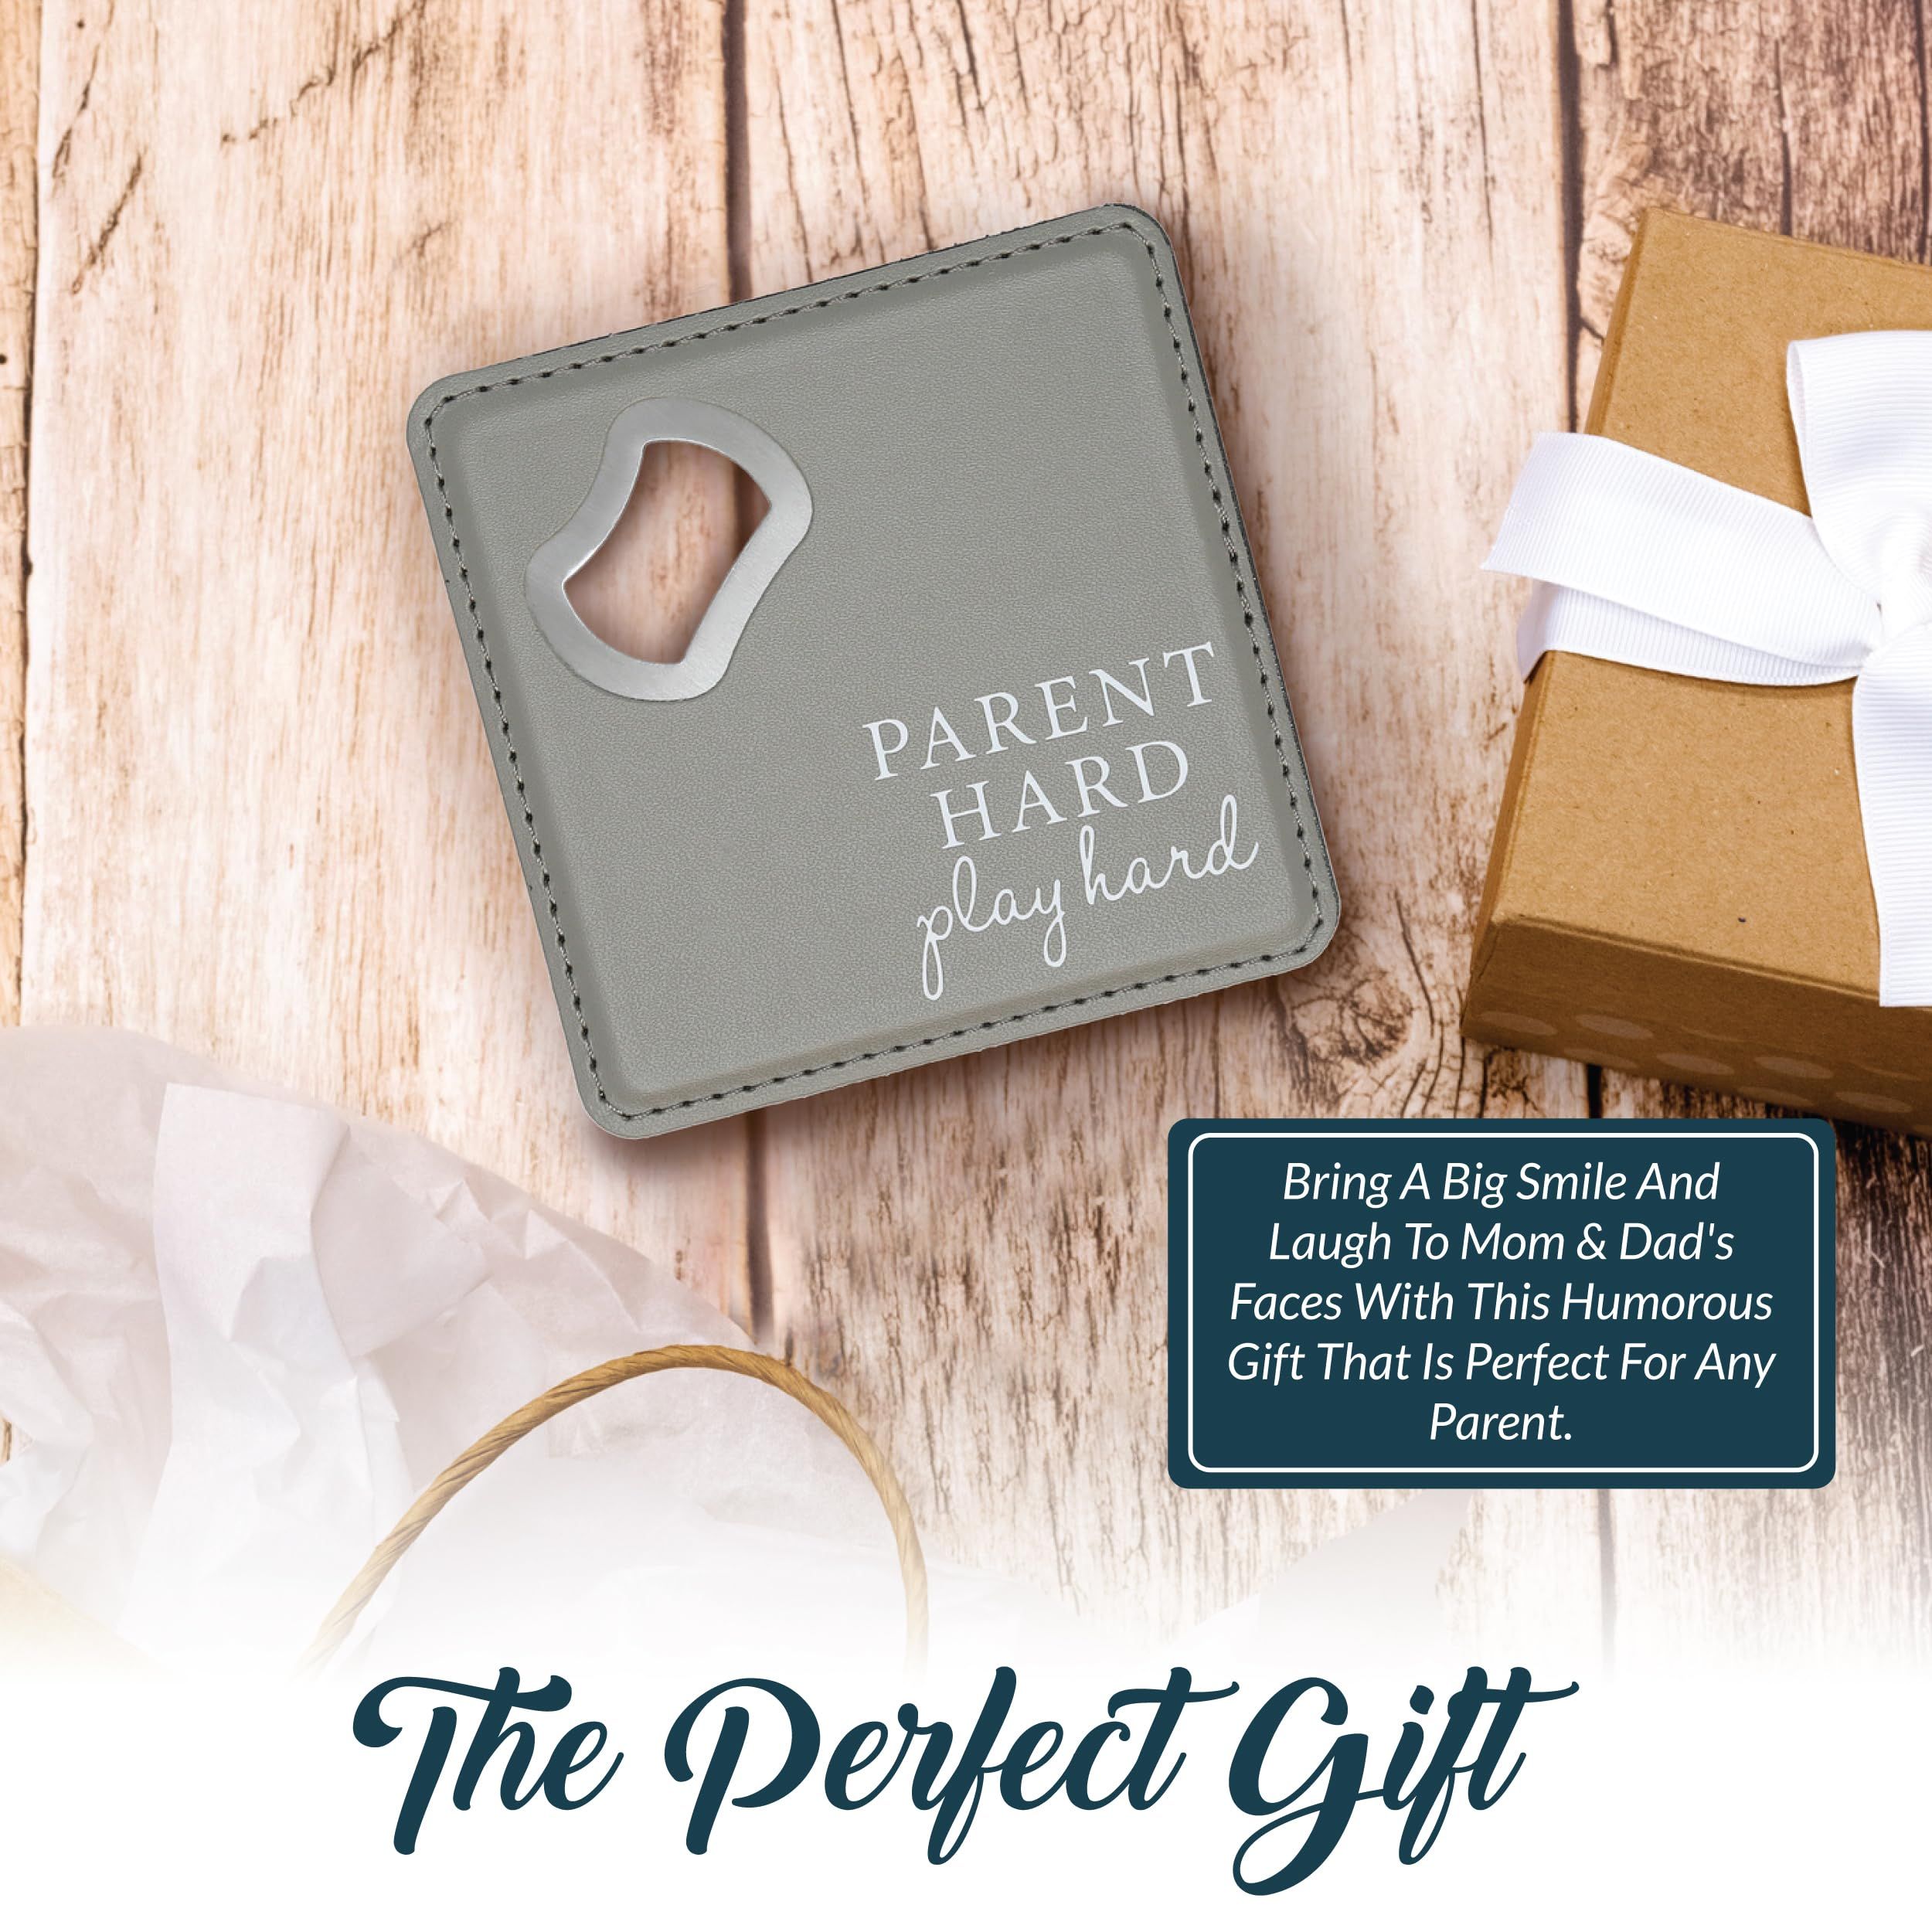 Christmas Gifts for Parents You Hate - Only Passionate Curiosity